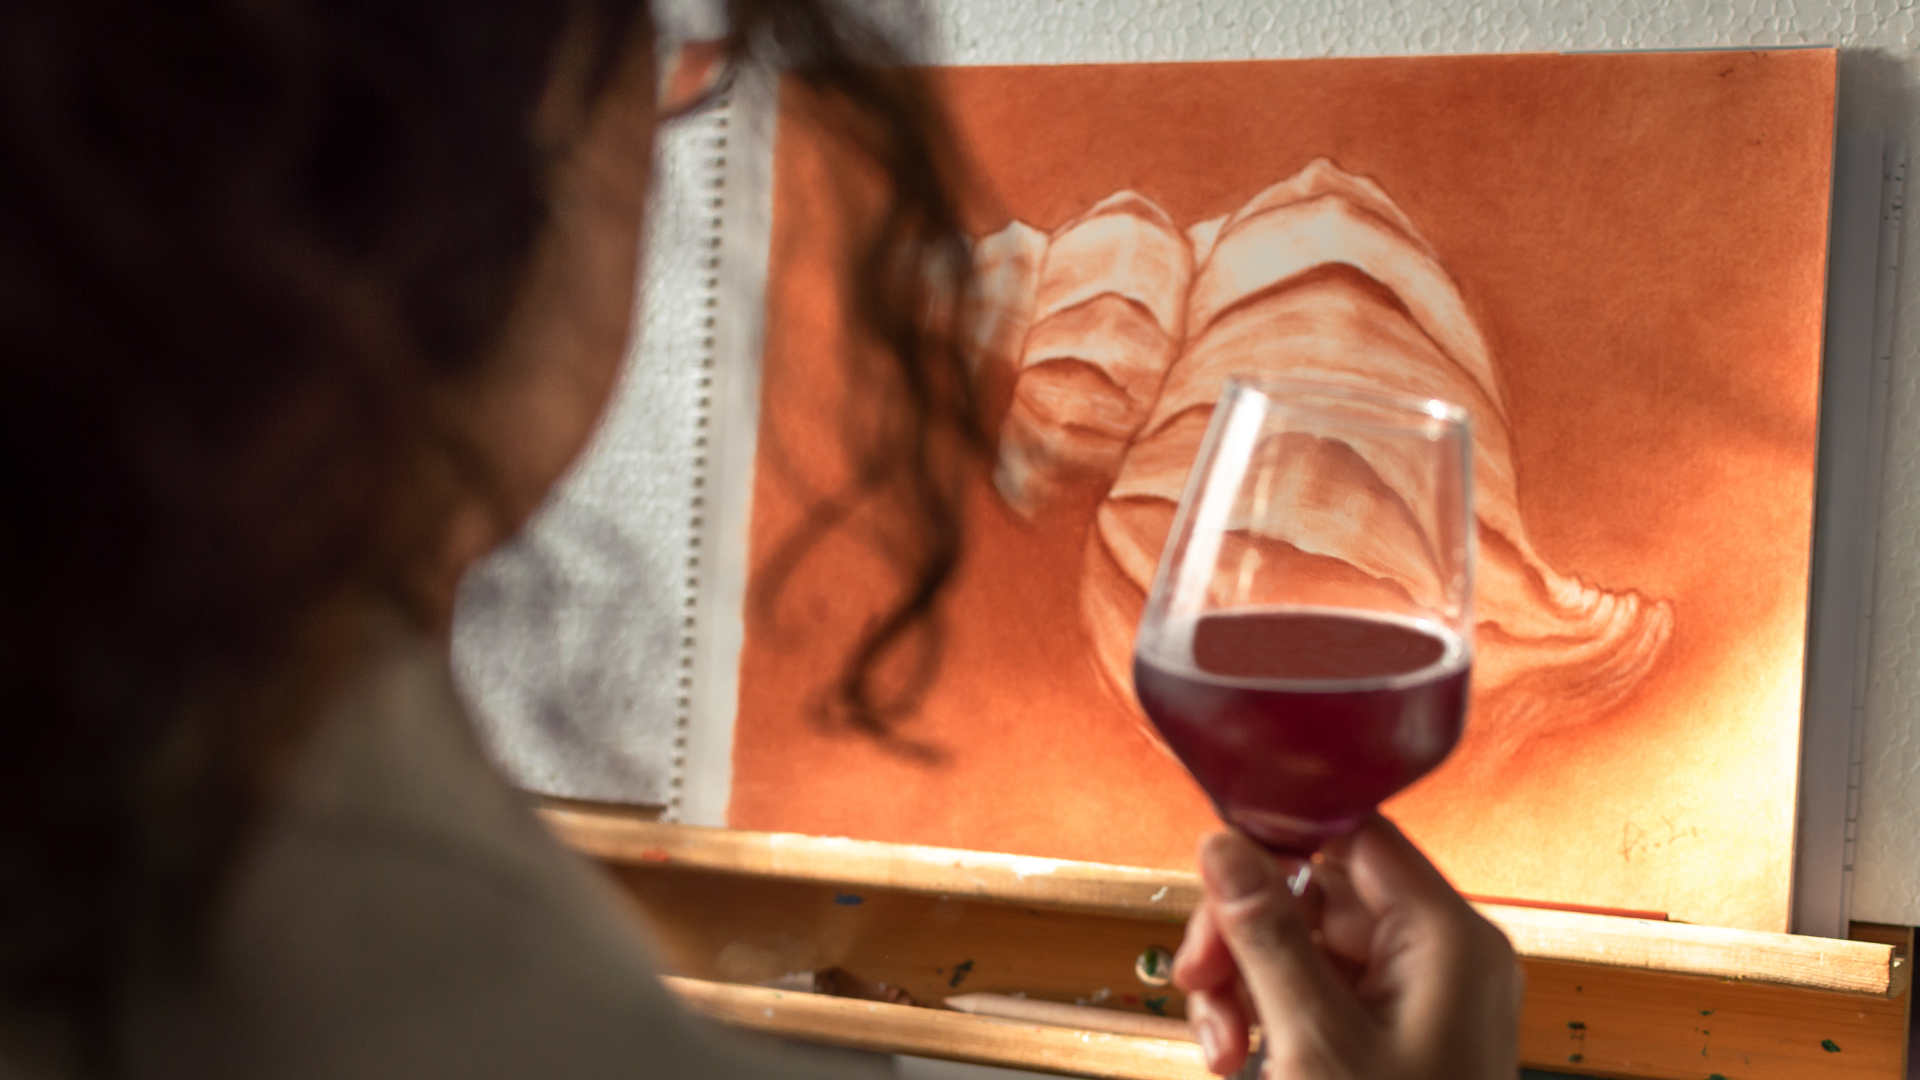 Woman holding a wine glass in front of a painting on an easel.